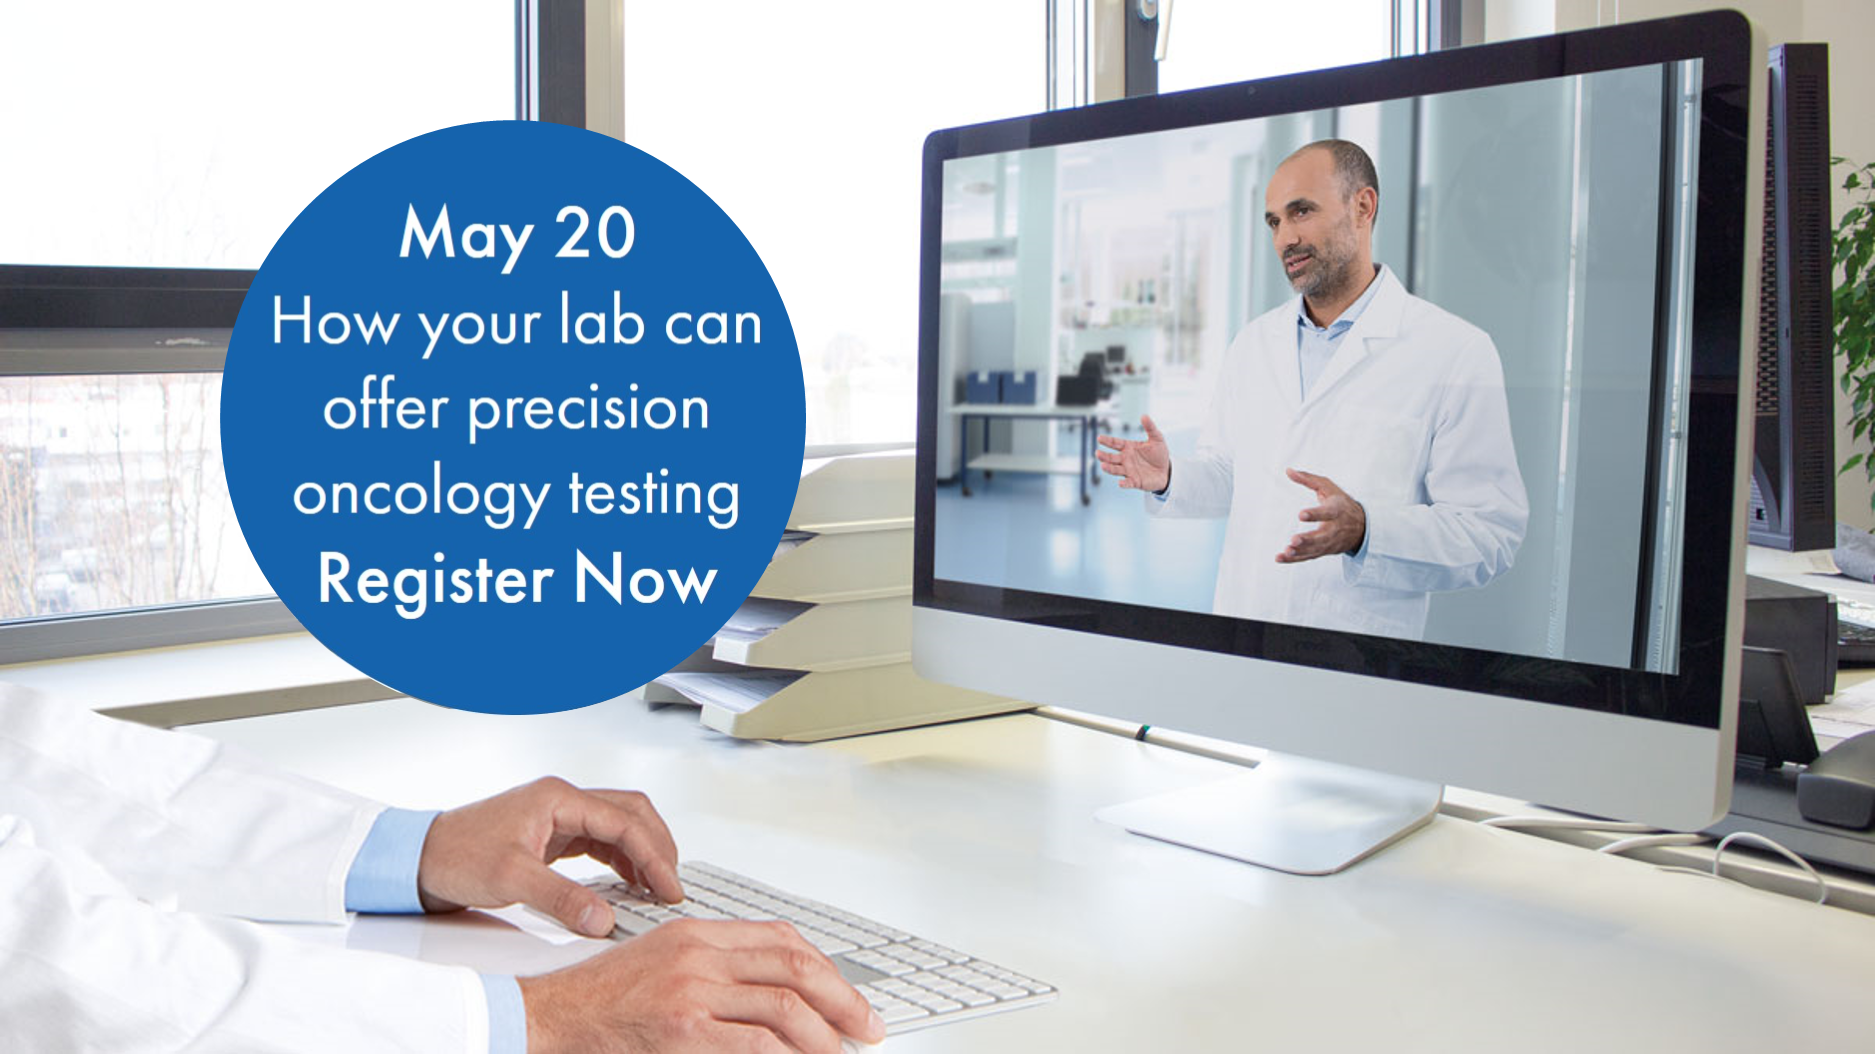 Interested in offering precision oncology testing in your lab?